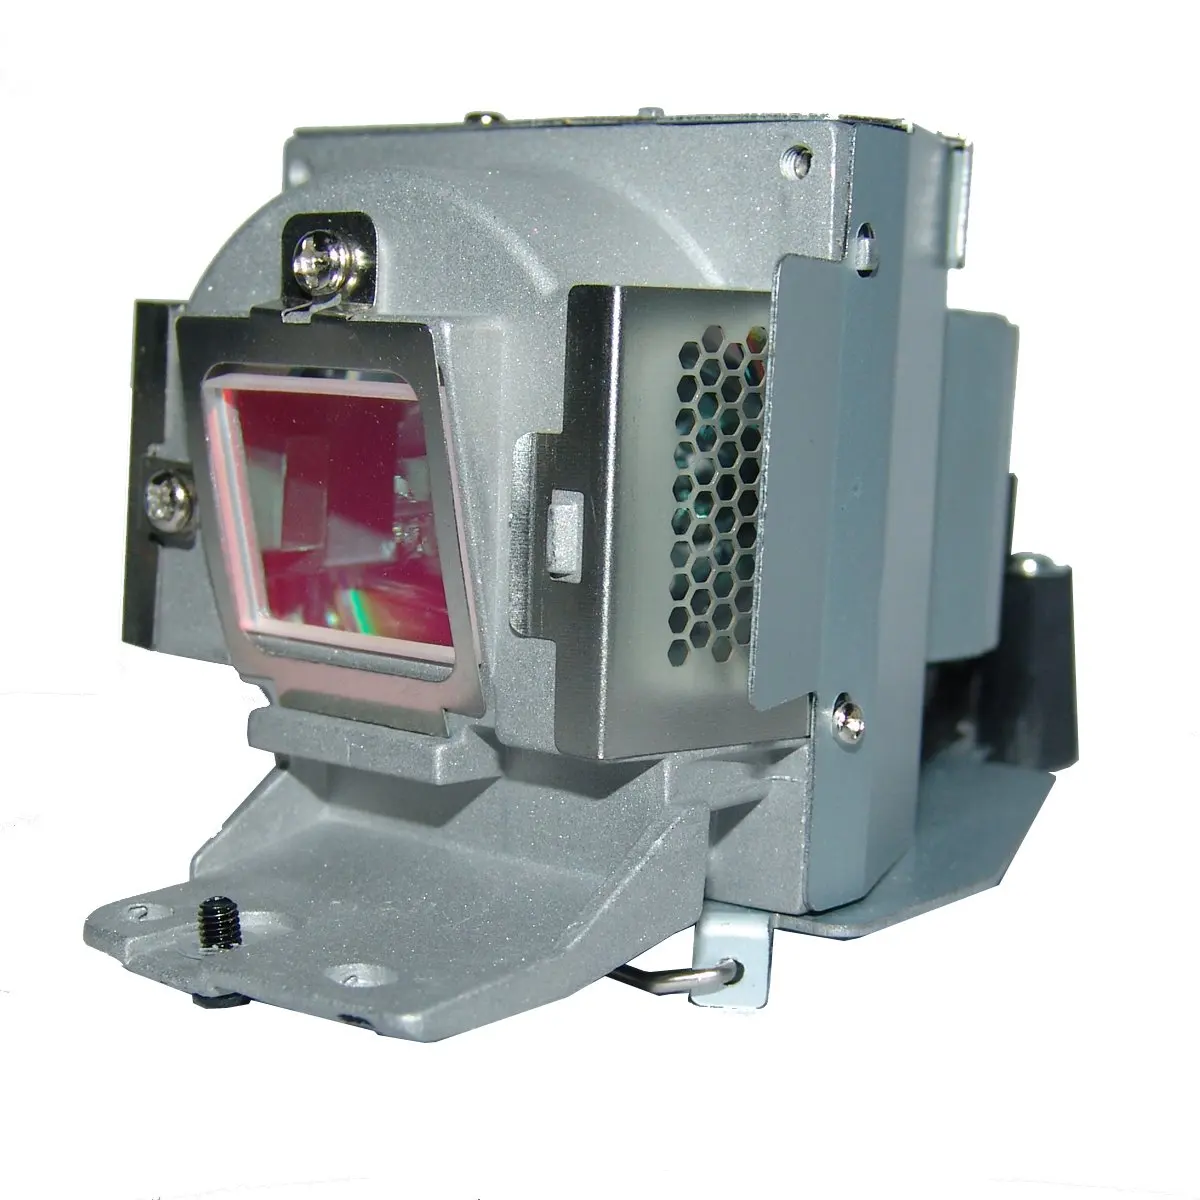 

DT01461 high quality Projector Lamp for Dukane ImagePro 8420 Dukane ImagePro 8421 for Hitachi CP-DX250 CP-DX300